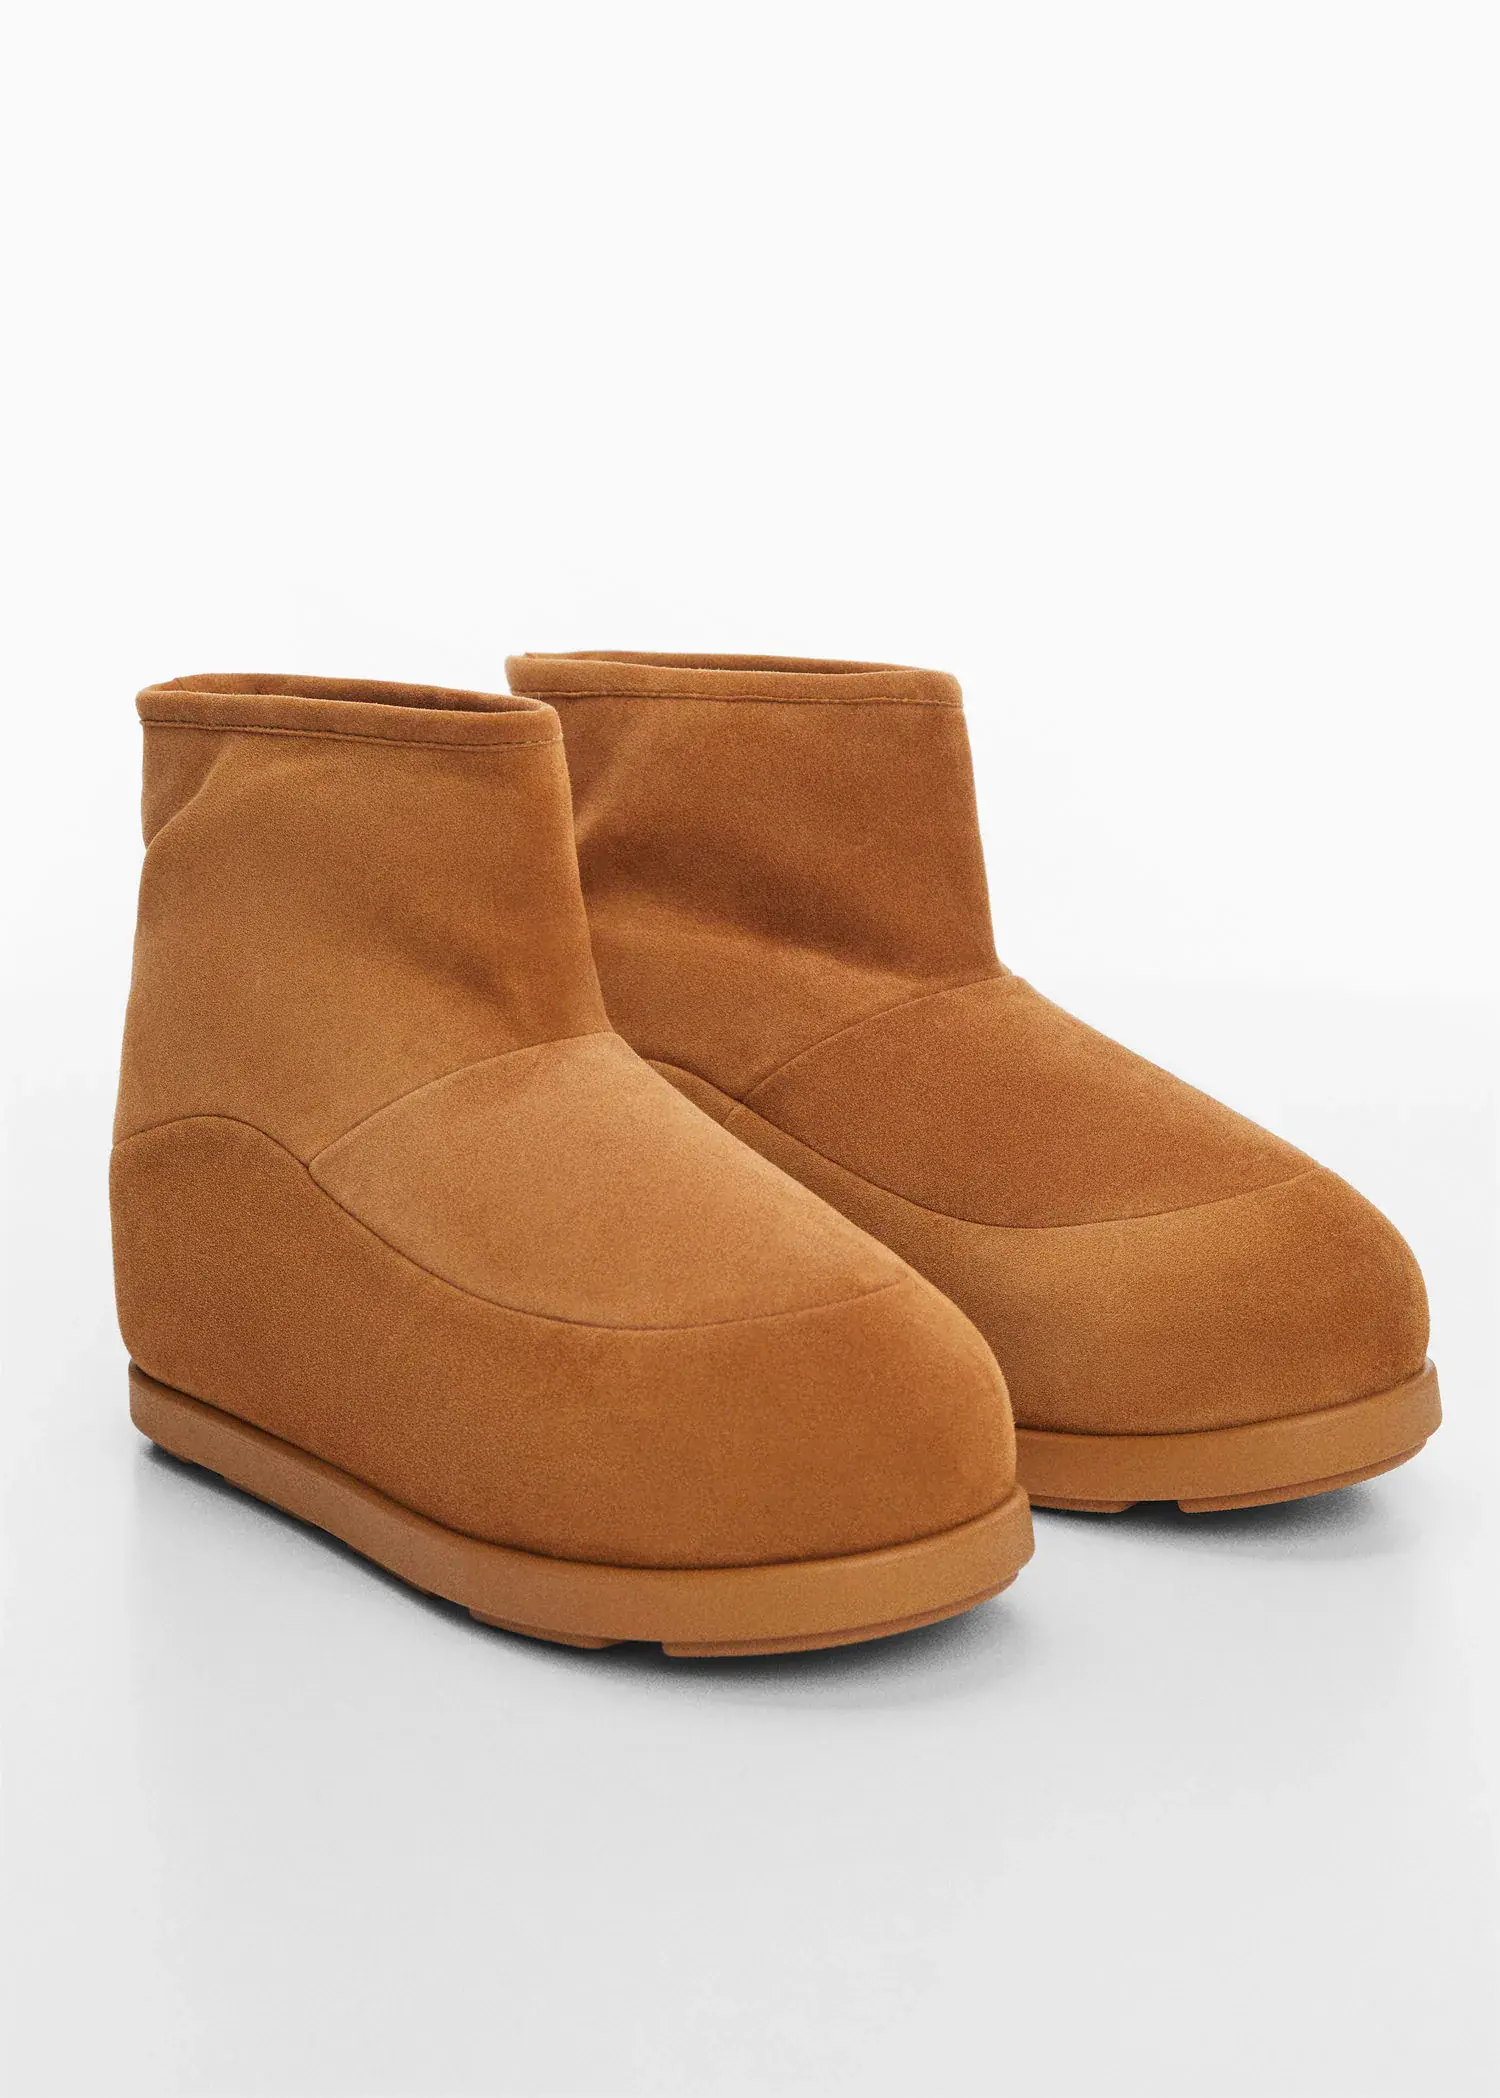 Mango Fur-effect suede ankle boots. 3